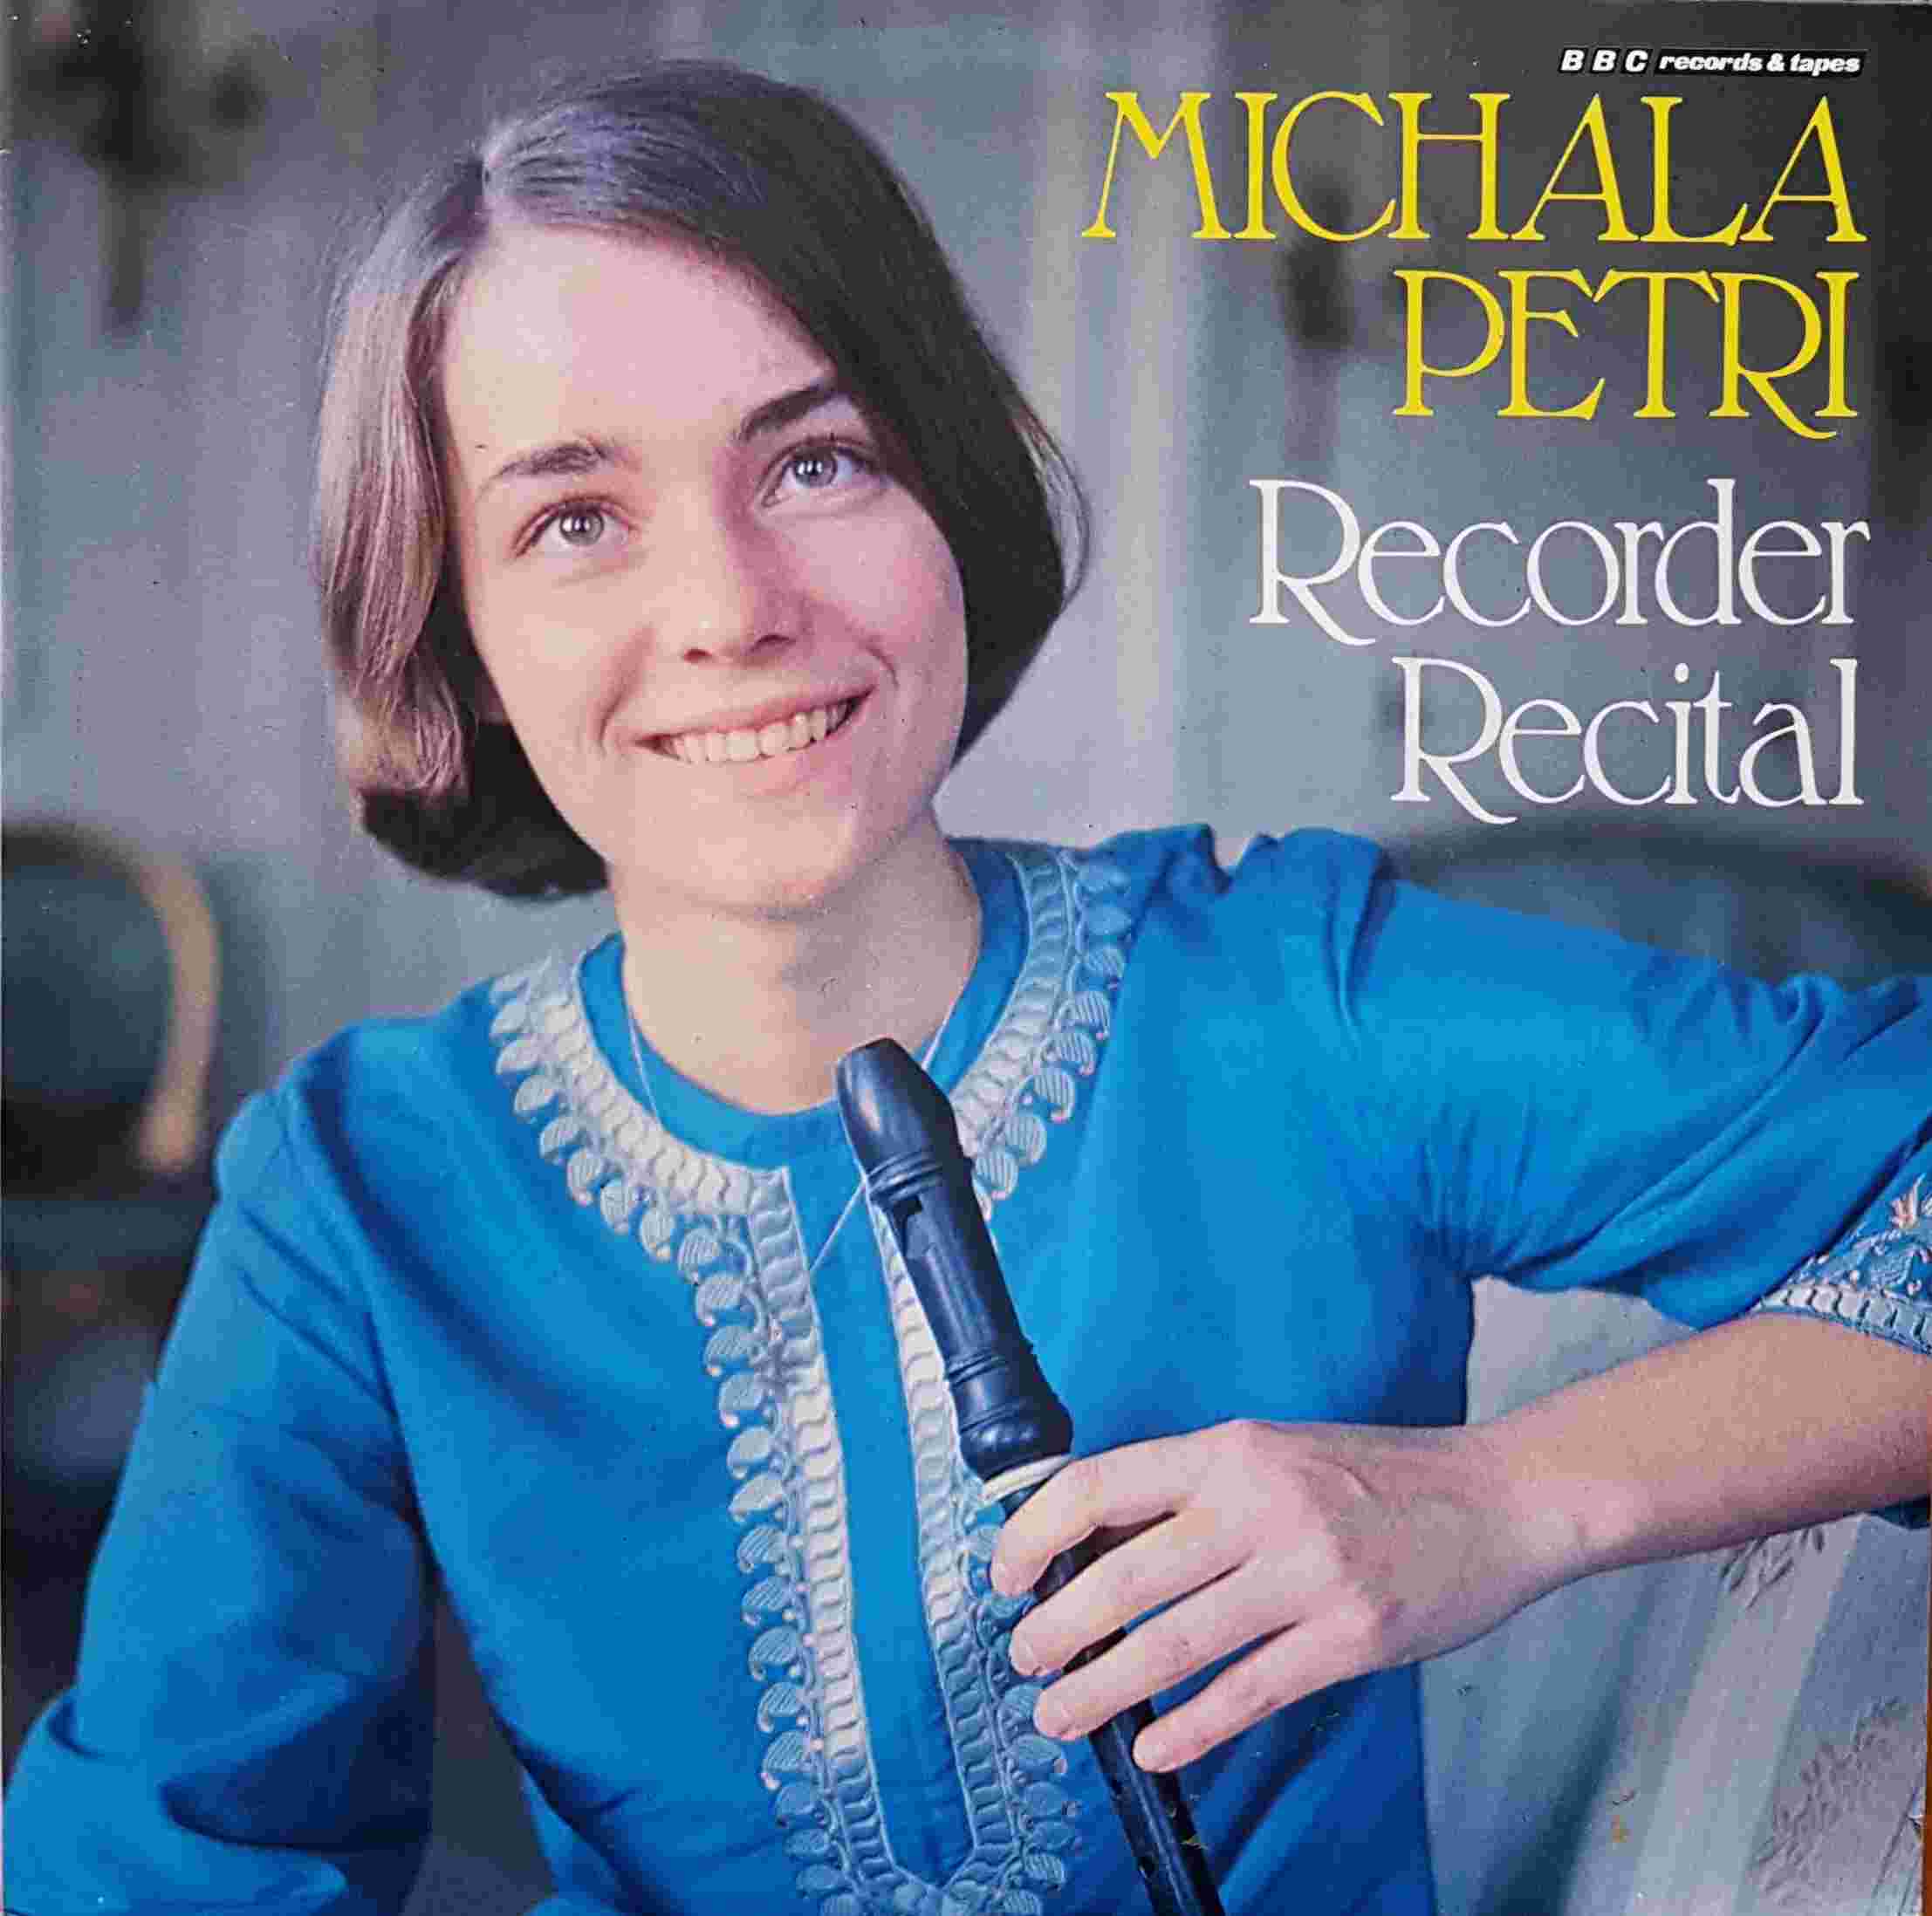 Picture of REC 298 Michala Petri recorder recital by artist Michala Petri  from the BBC albums - Records and Tapes library